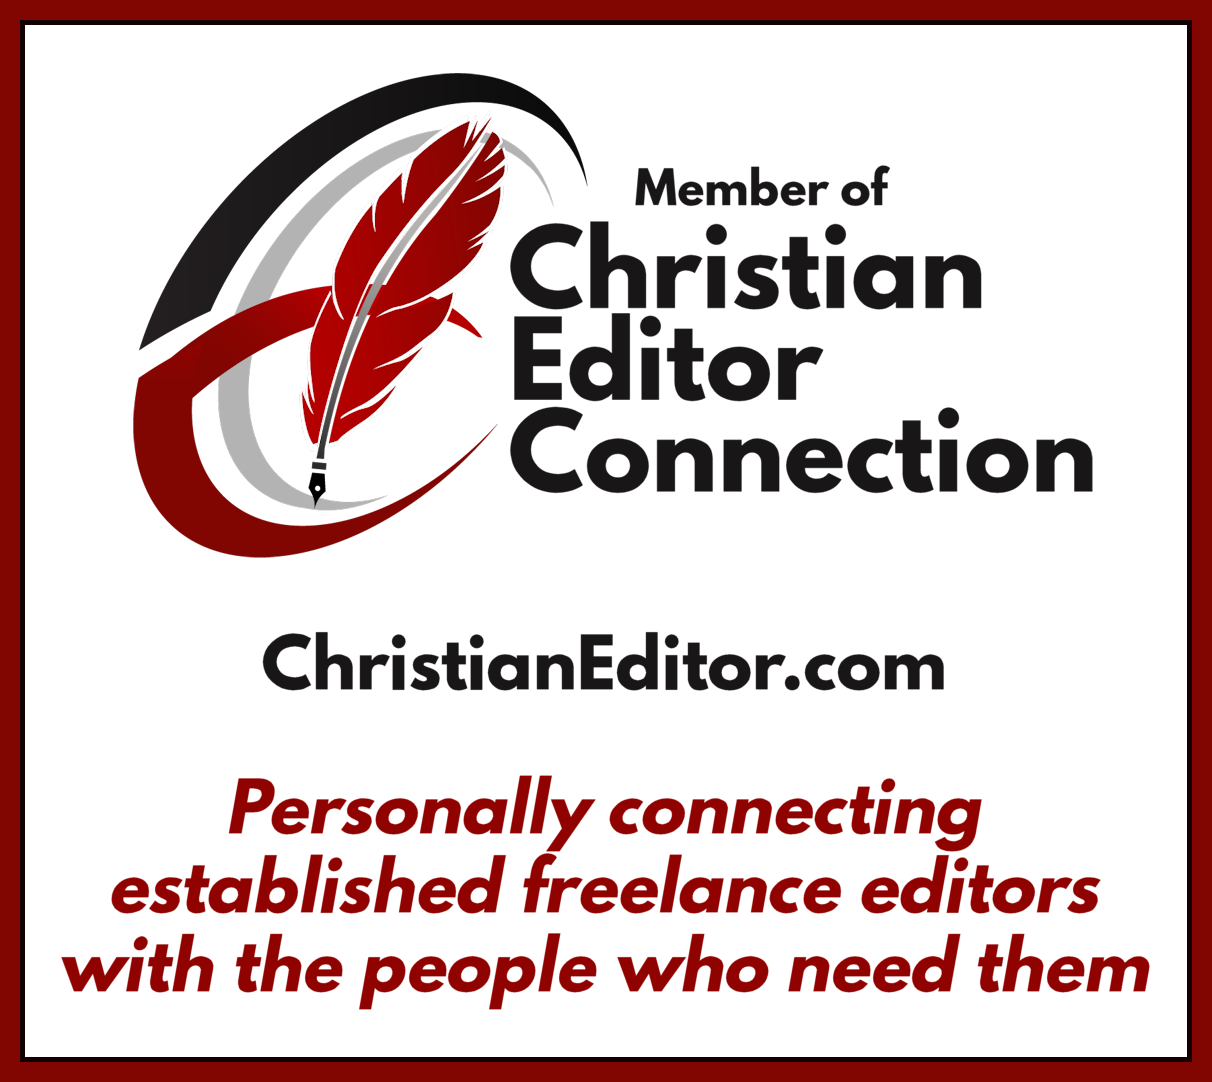 Christian Editor Connection